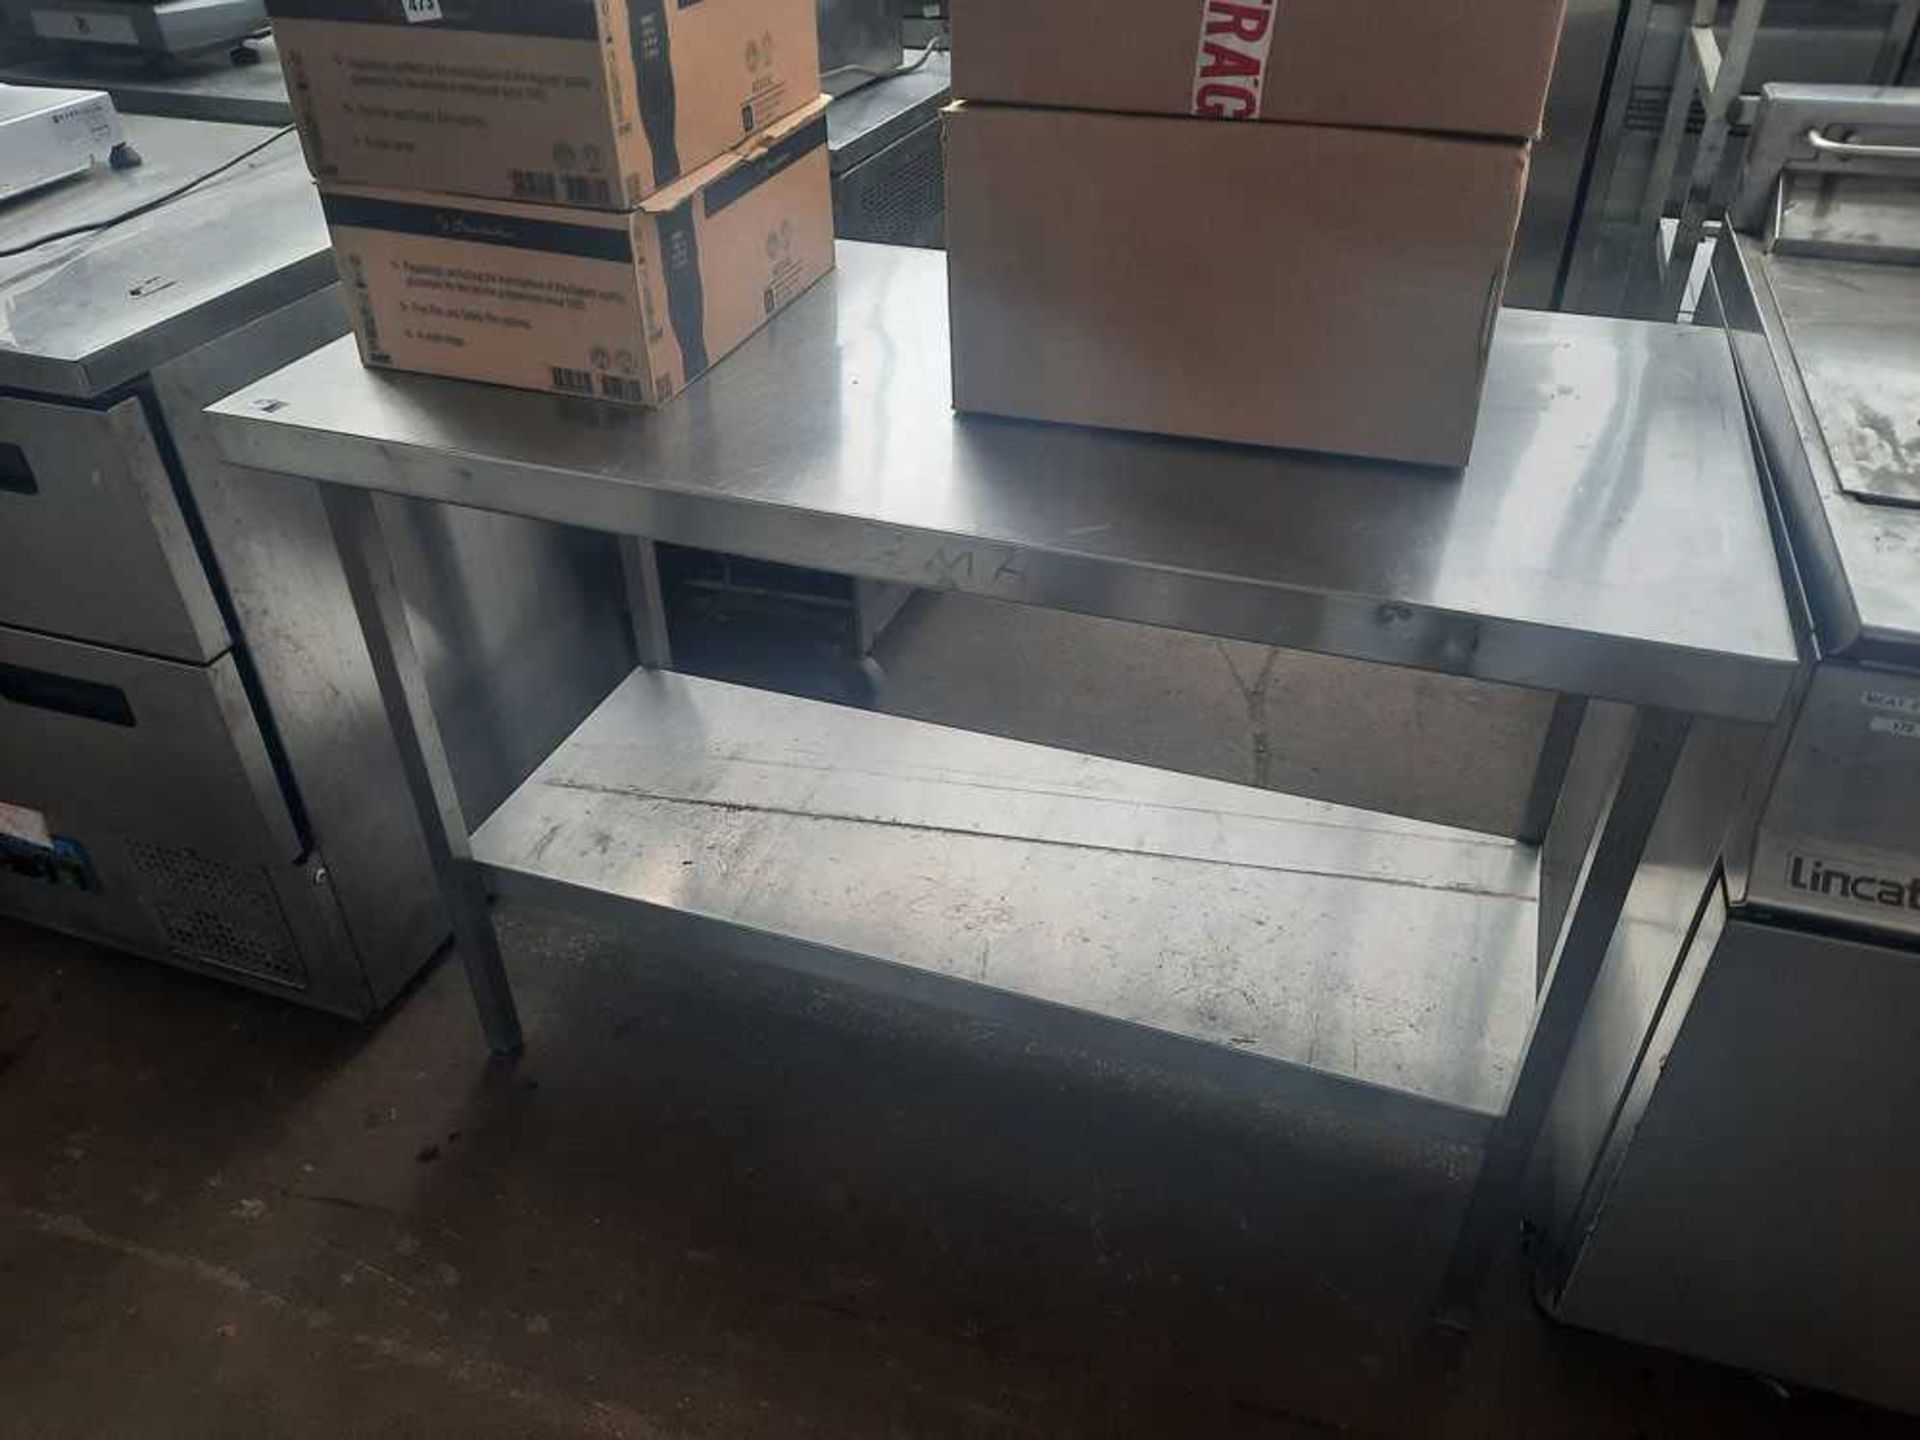 120cm stainless steel preparation table with a shelf under - Image 2 of 2